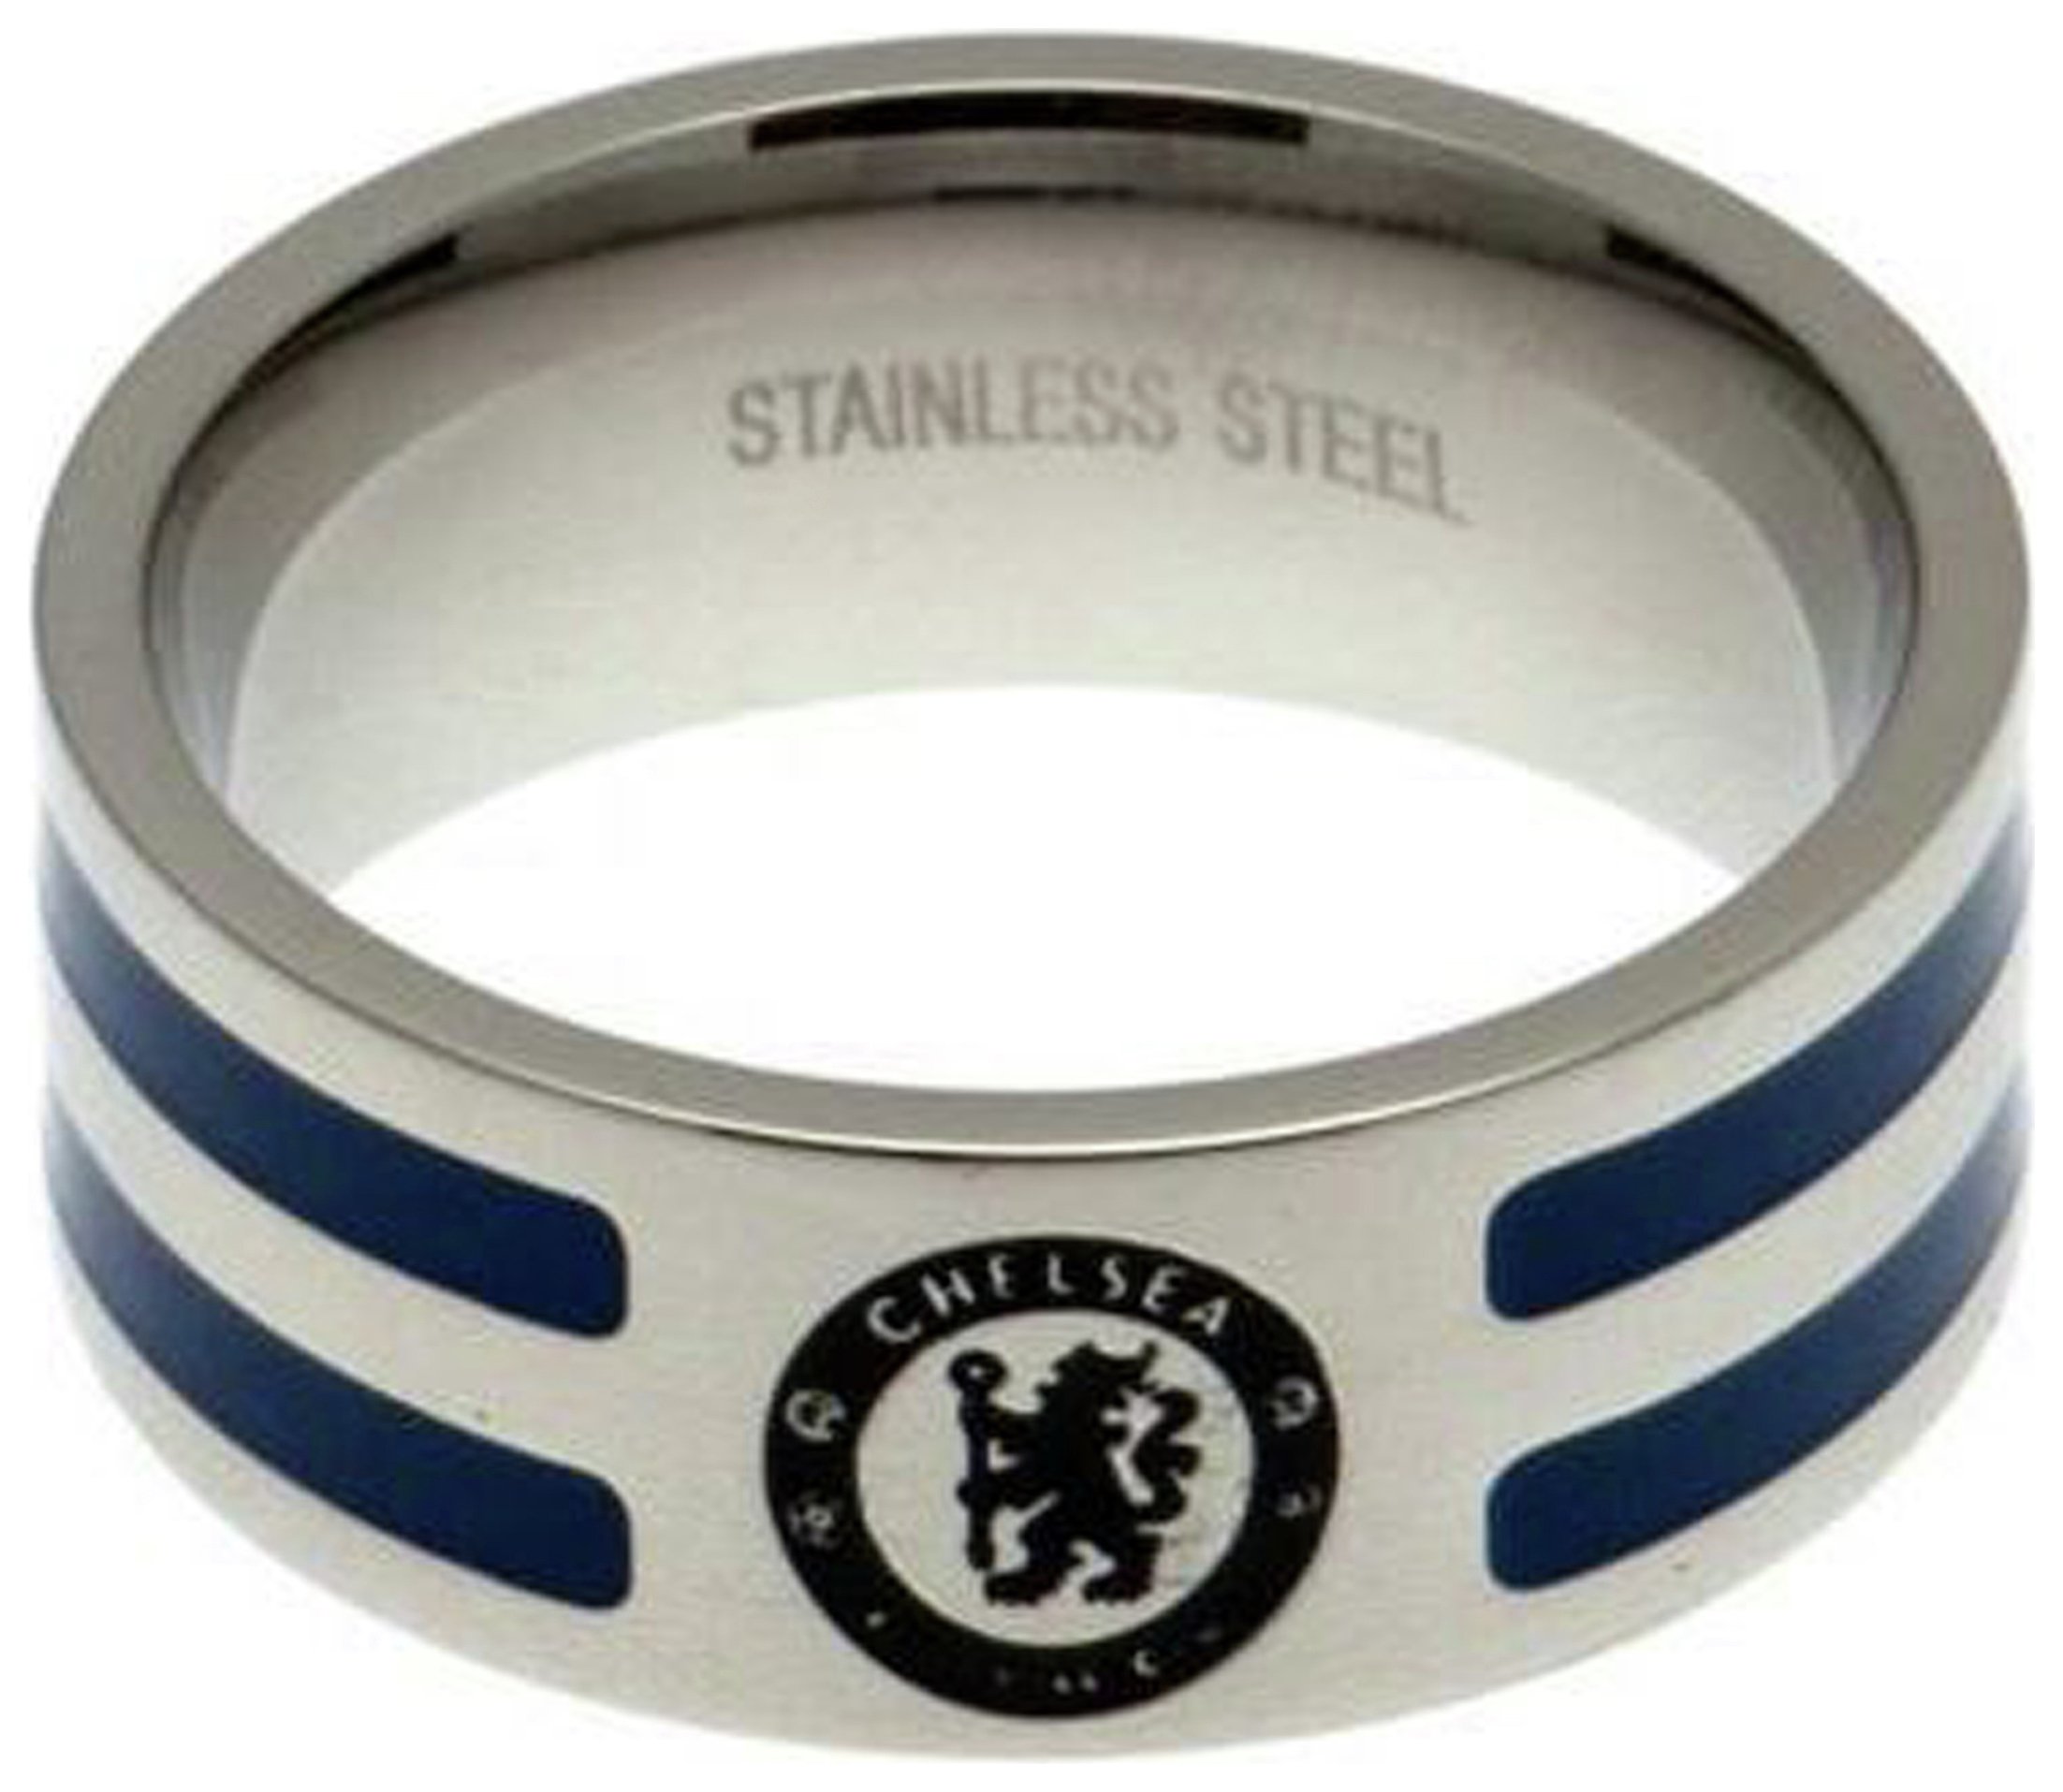 Stainless Steel Chelsea Striped Ring - Size X.